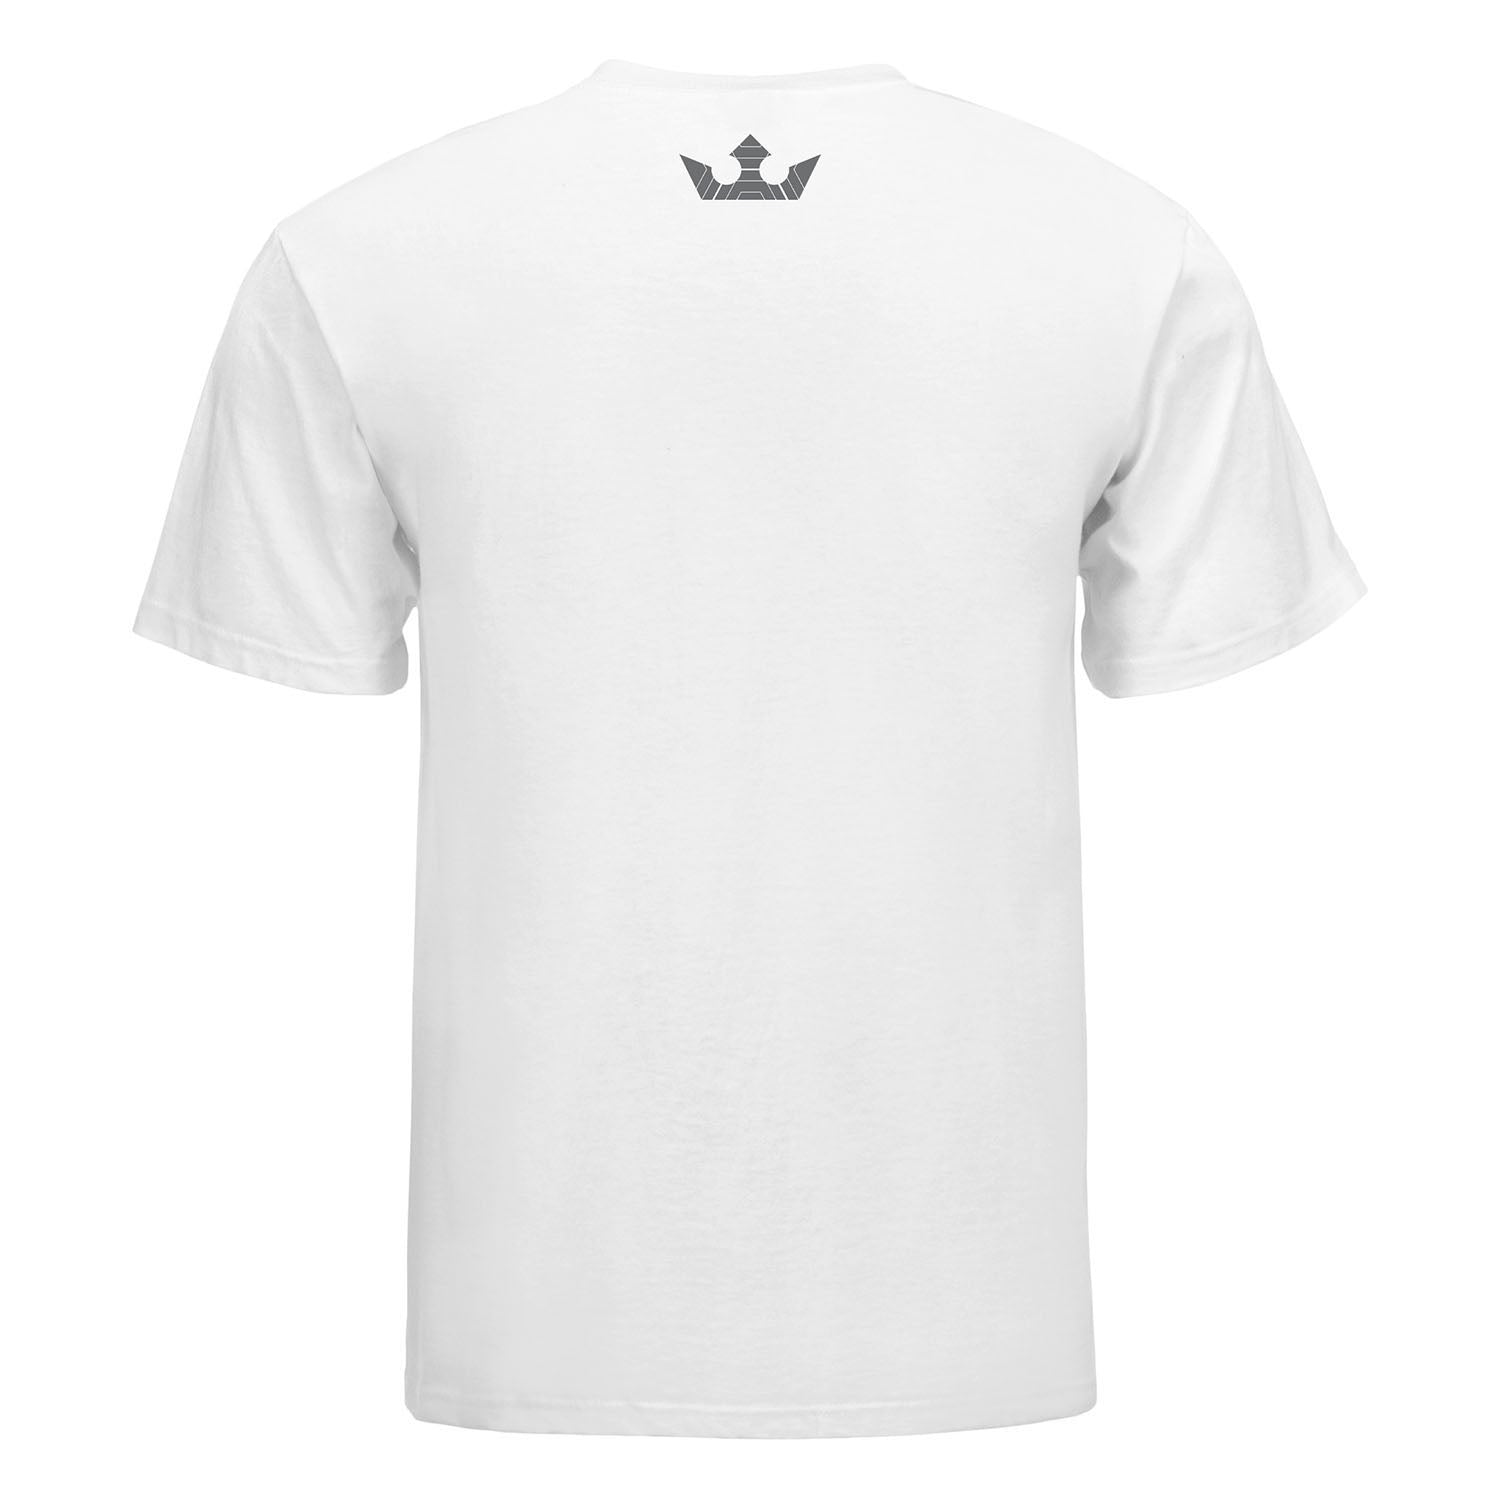 PFL Fighter Corner Tee in White - Front View